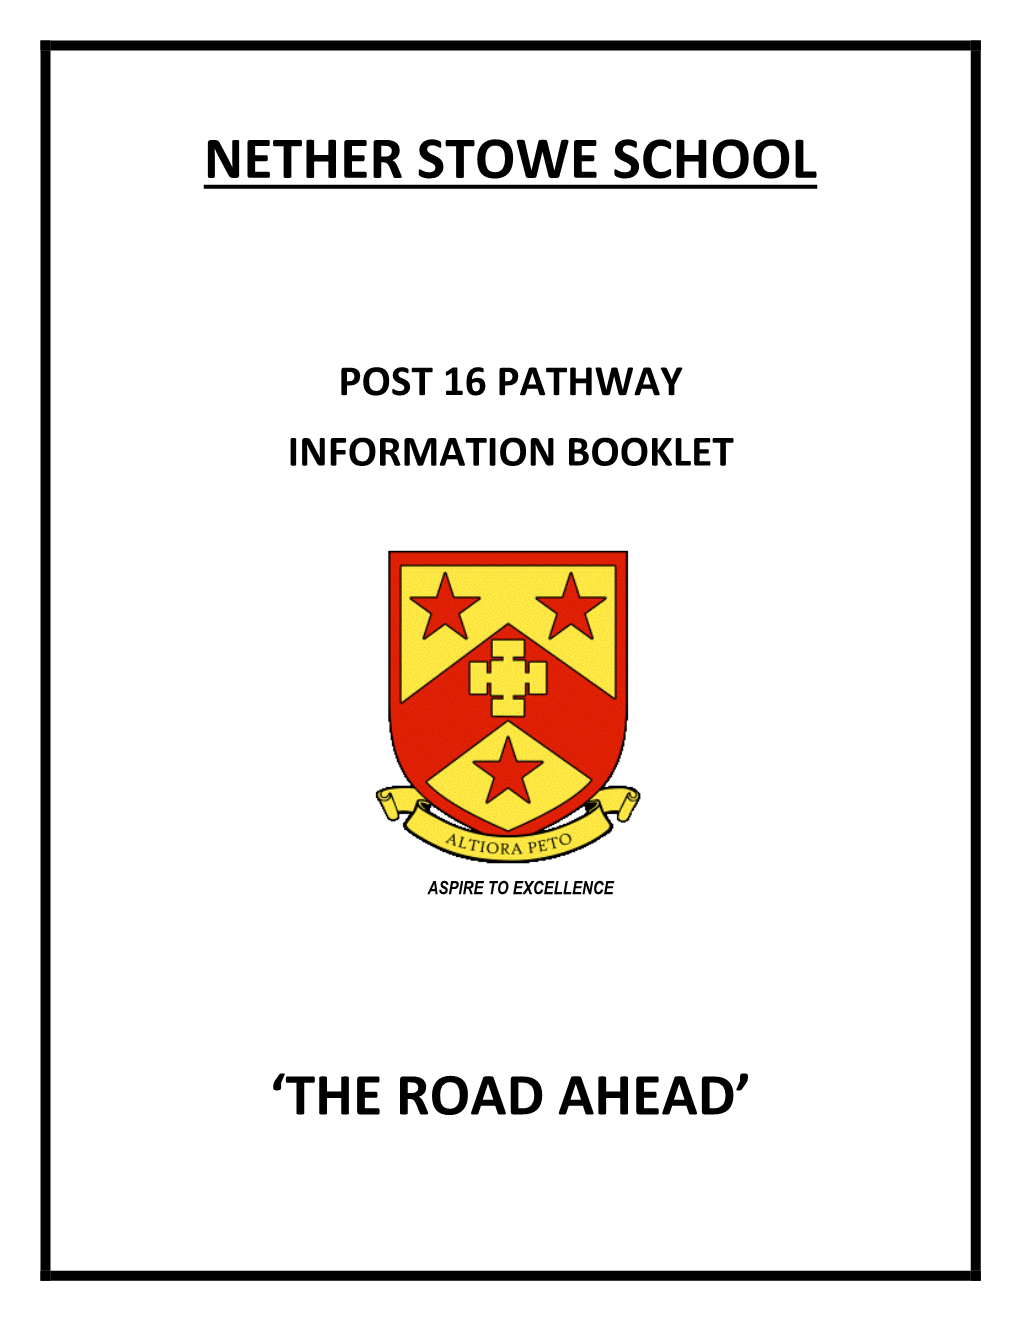 Nether Stowe School 'The Road Ahead'